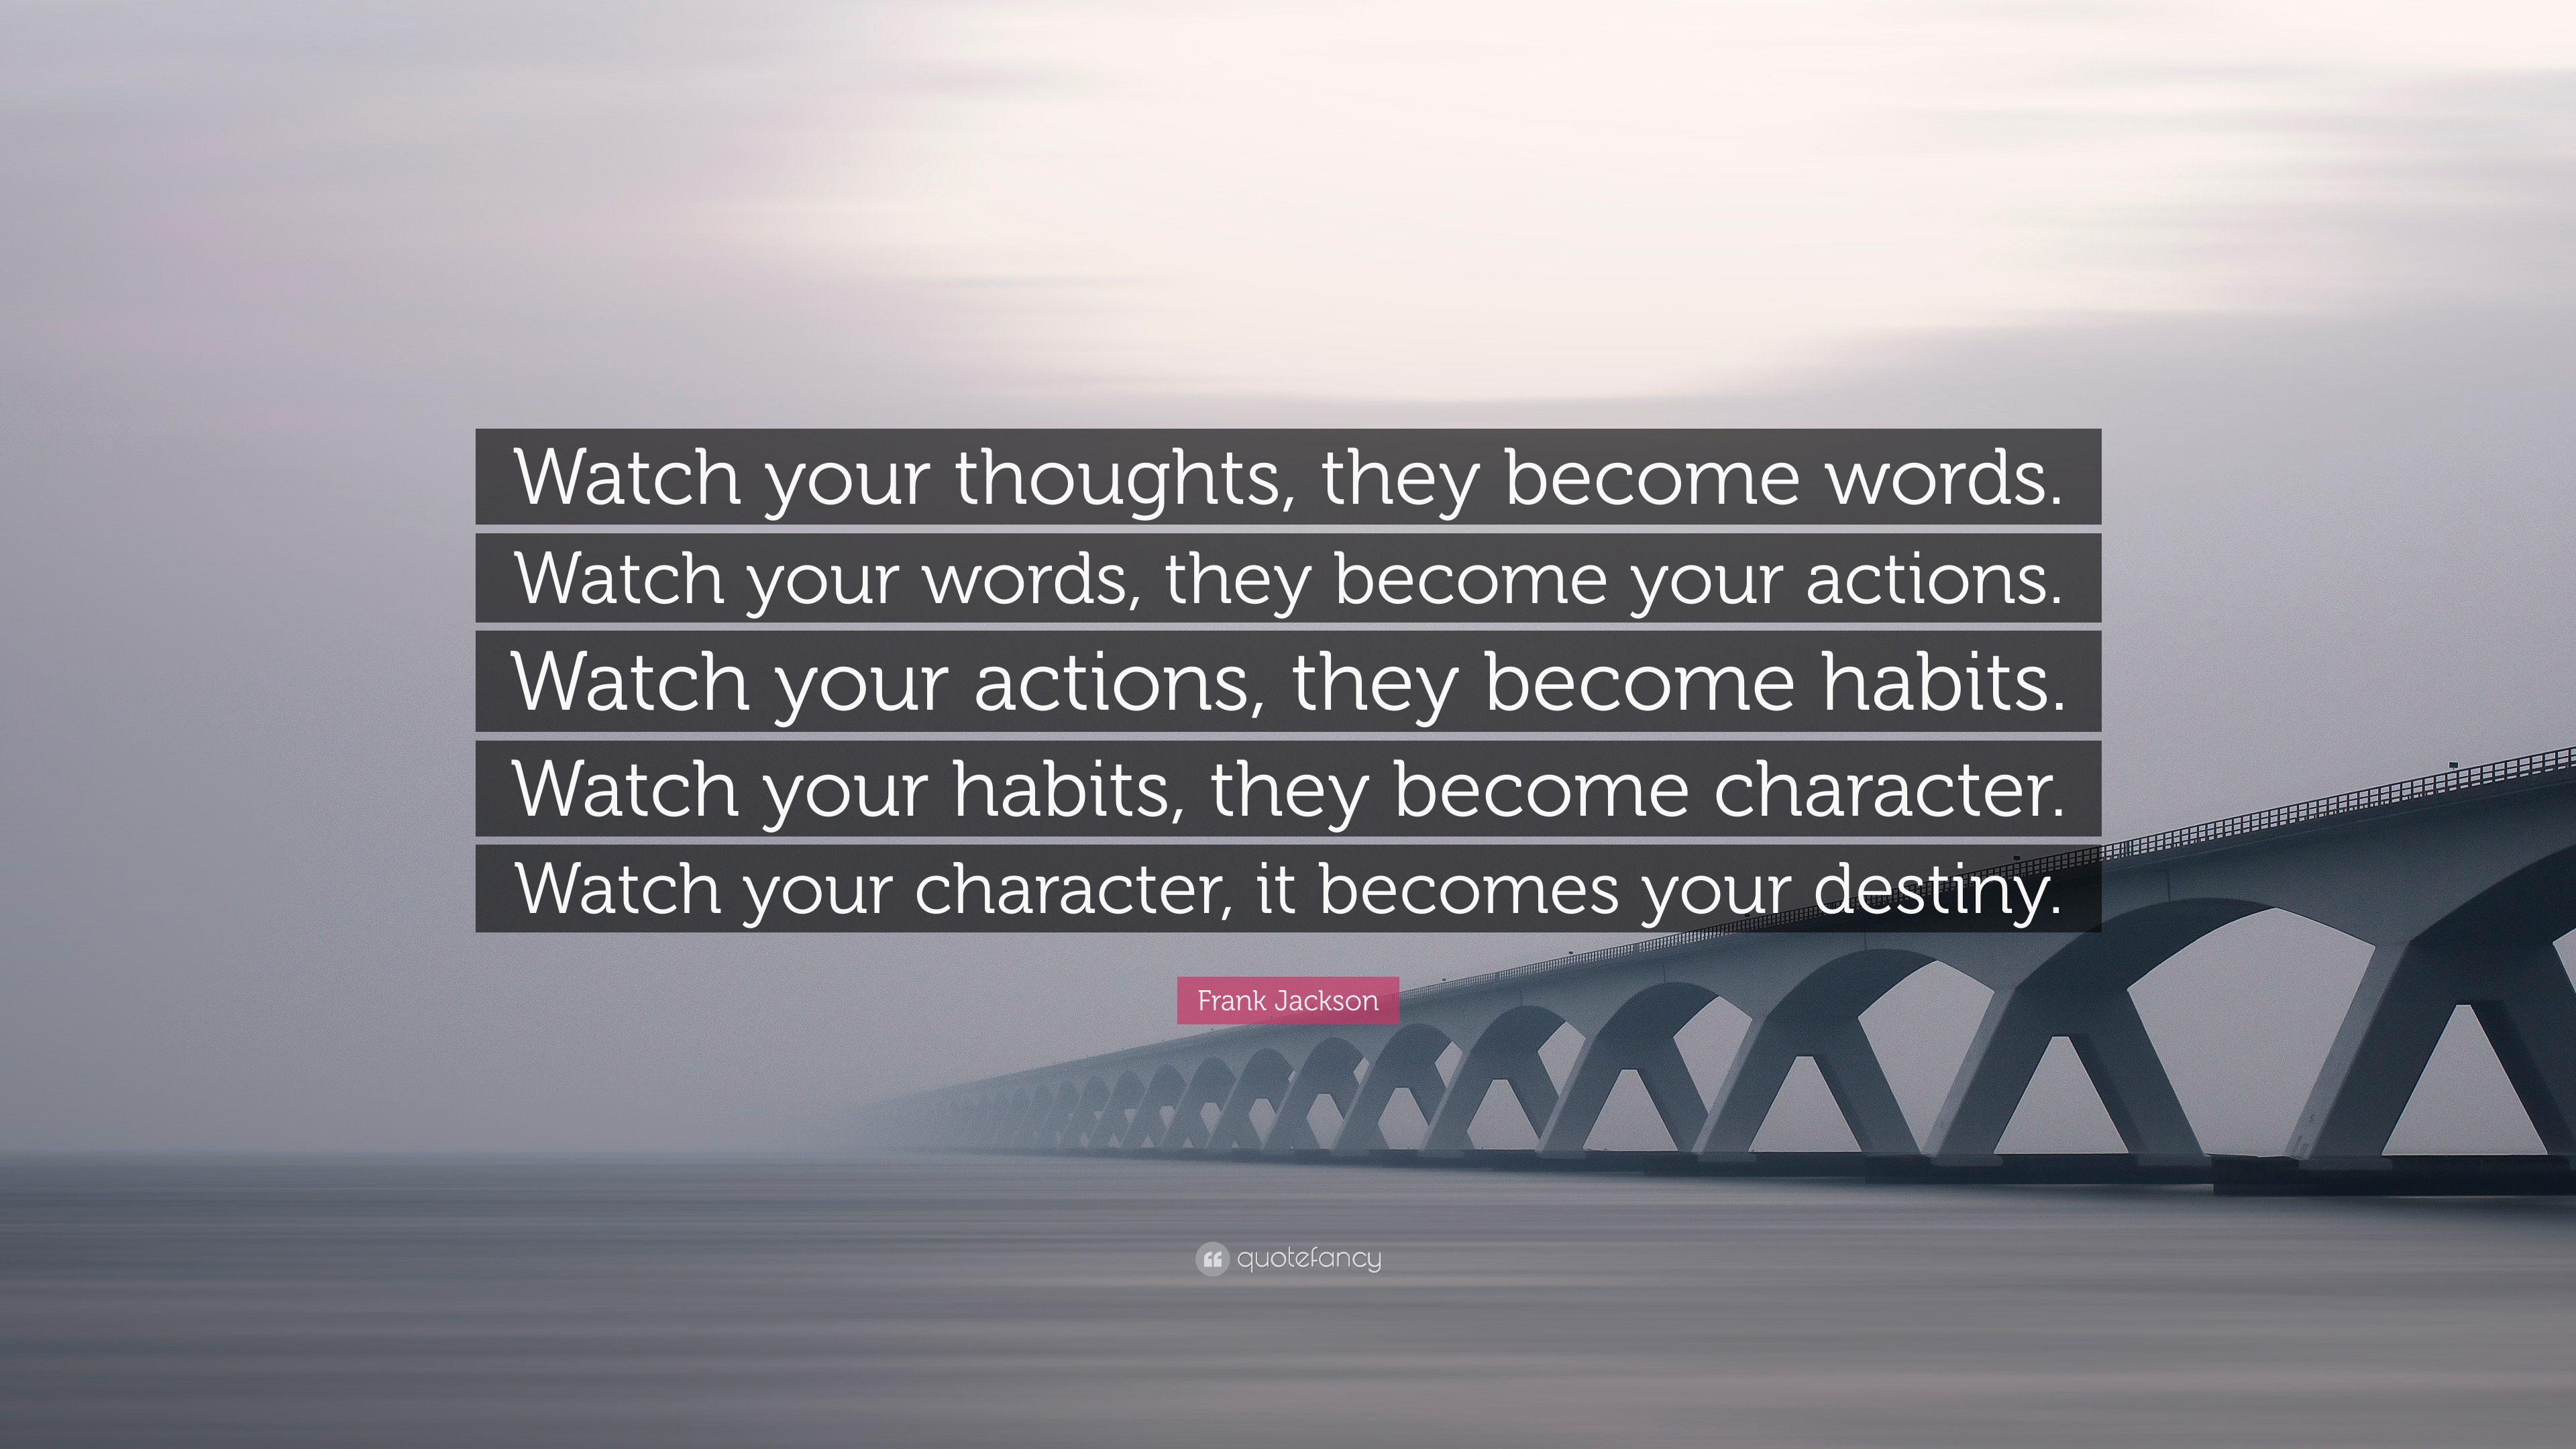 watch your thoughts they become words explanation